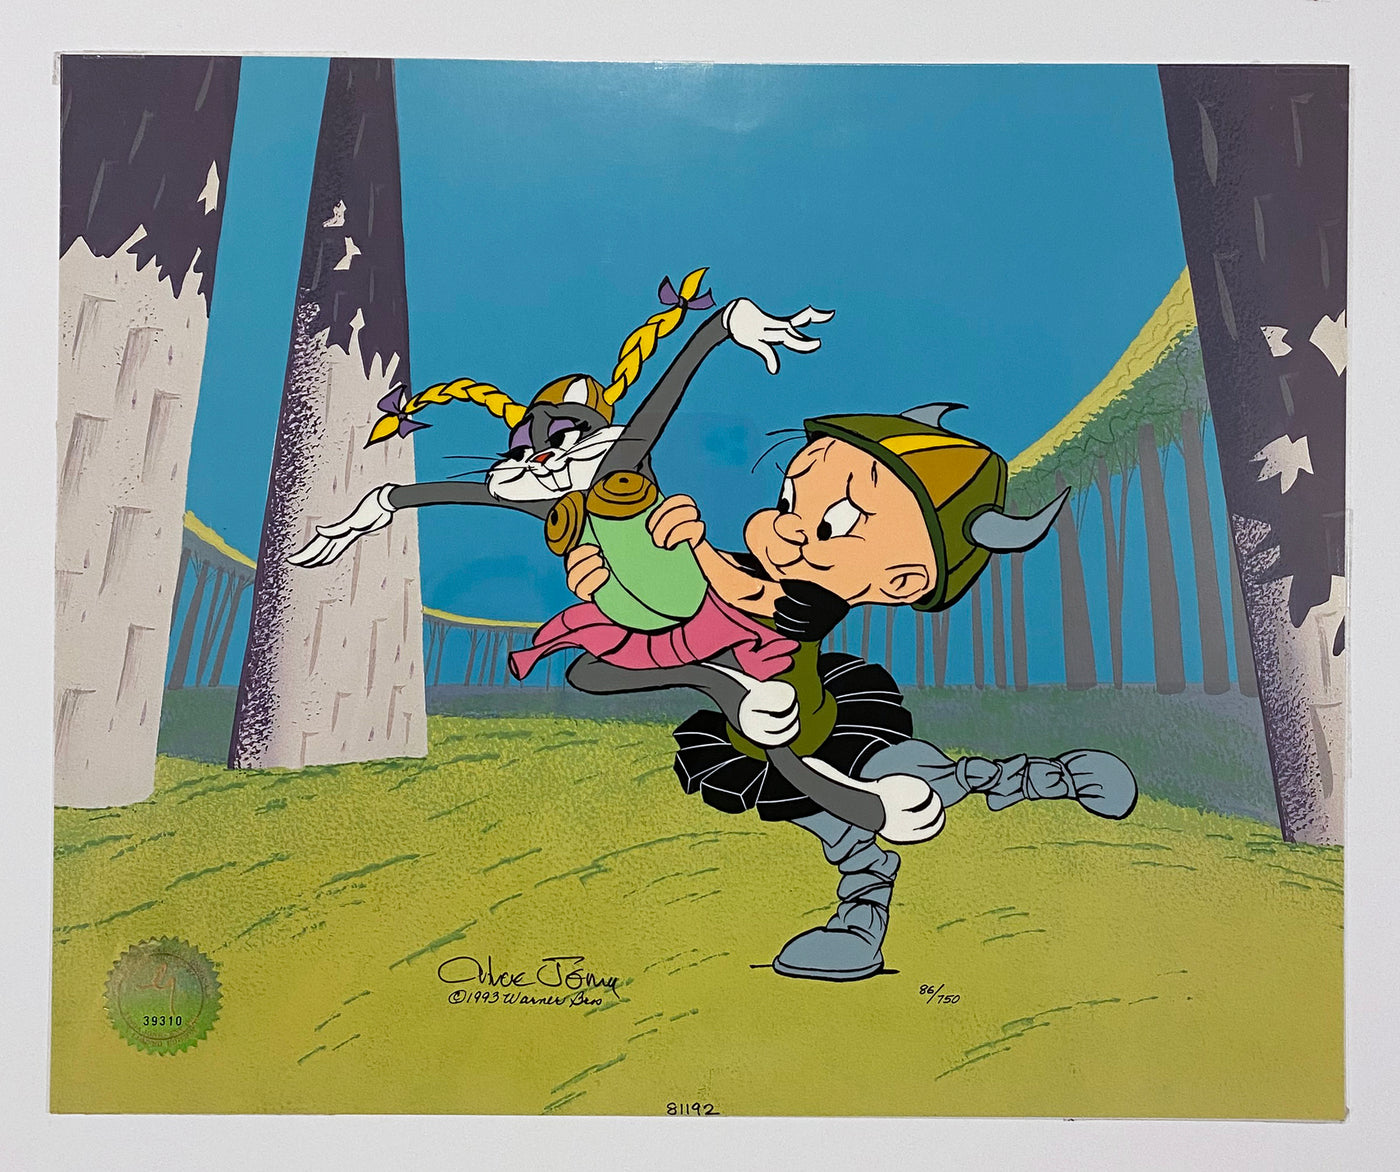 Original Warner Brothers Limited Edition Cel "Whats Opera, Doc? IV" Signed by Chuck Jones